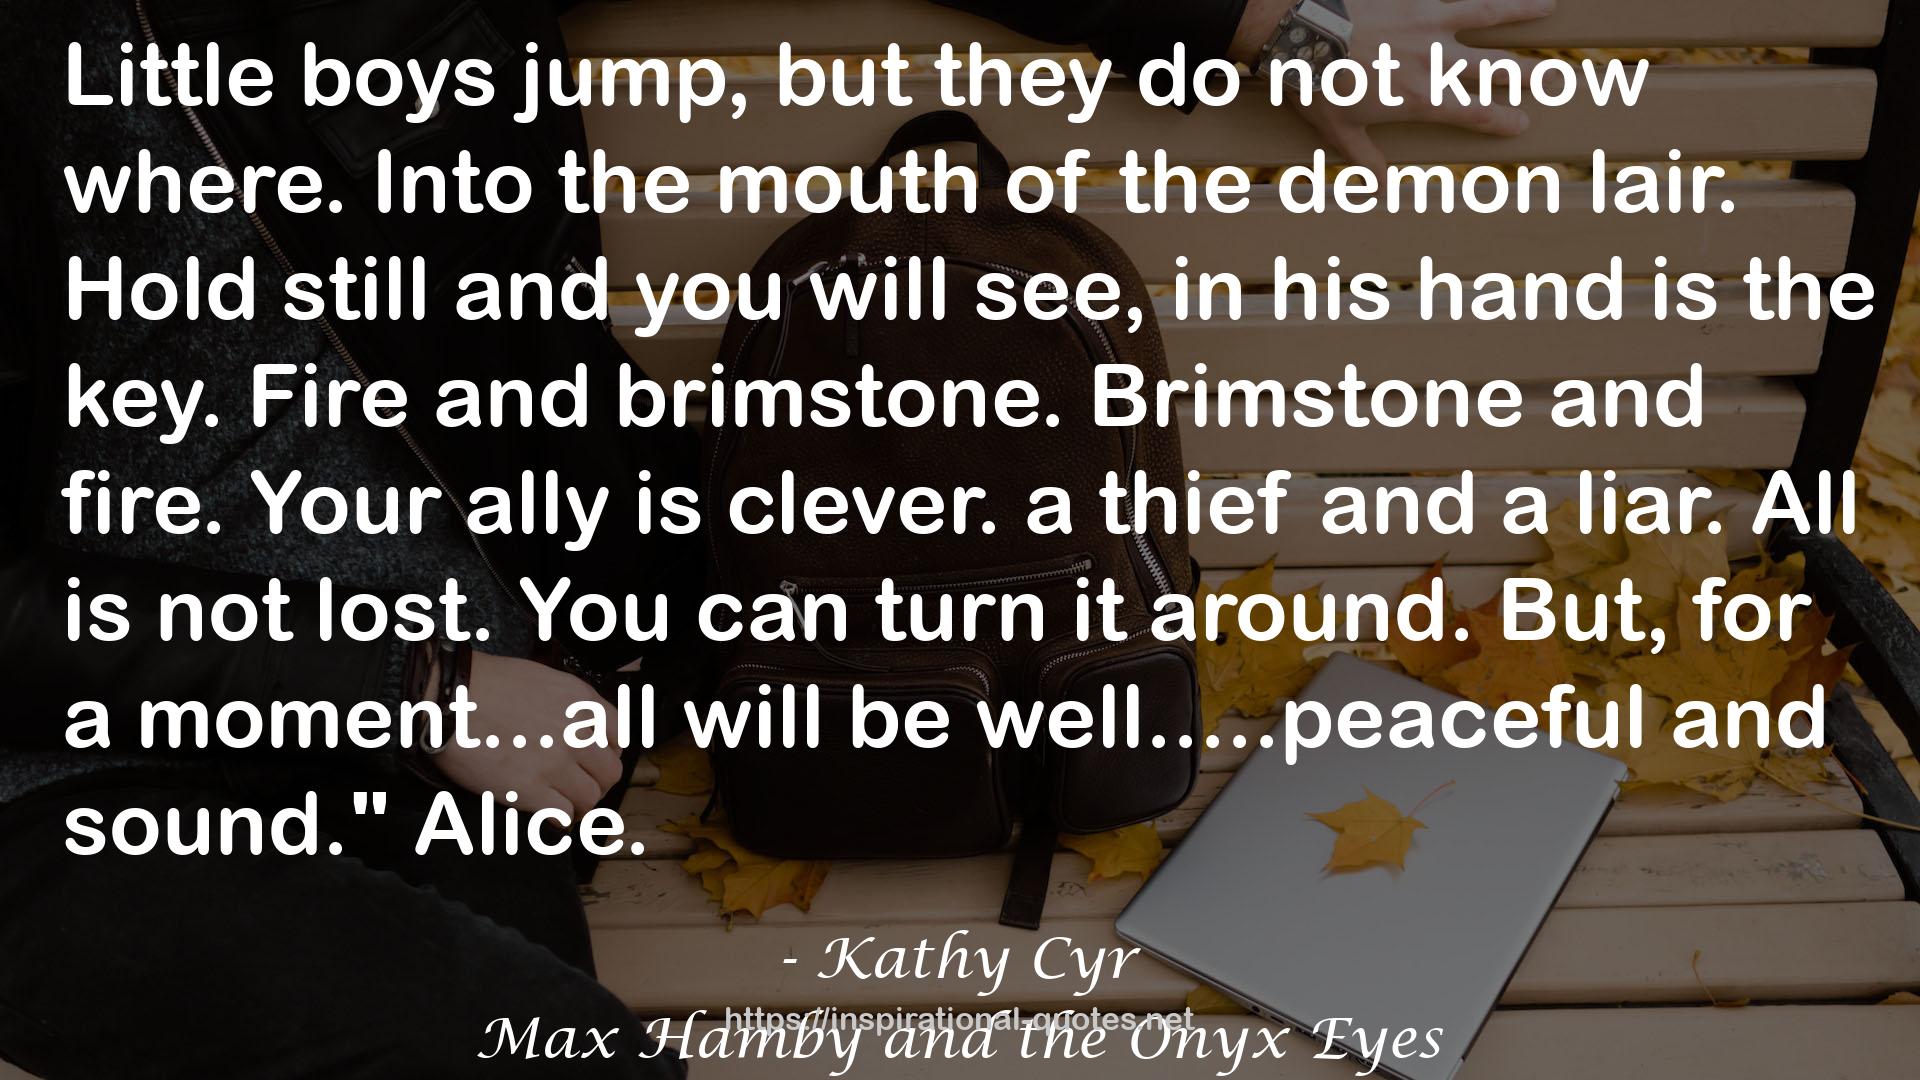 Max Hamby and the Onyx Eyes QUOTES